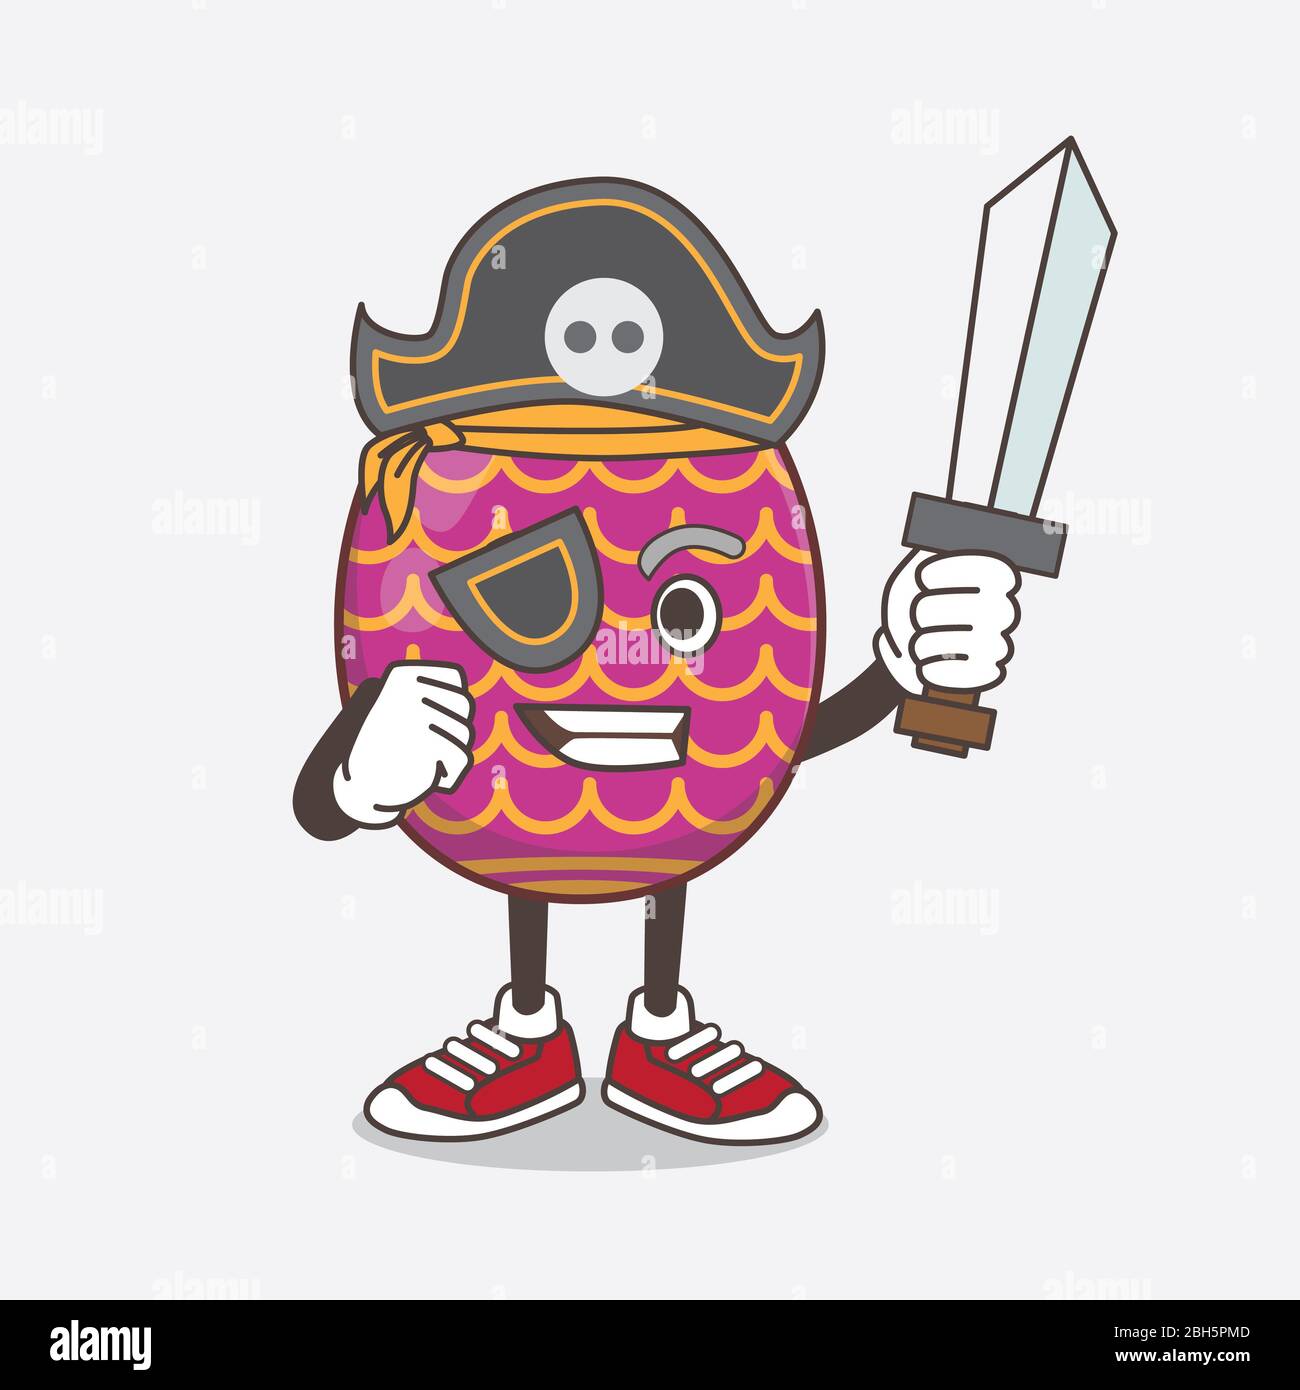 An illustration of Easter Egg cartoon mascot character in pirate style and wearing hat and sword Stock Photo